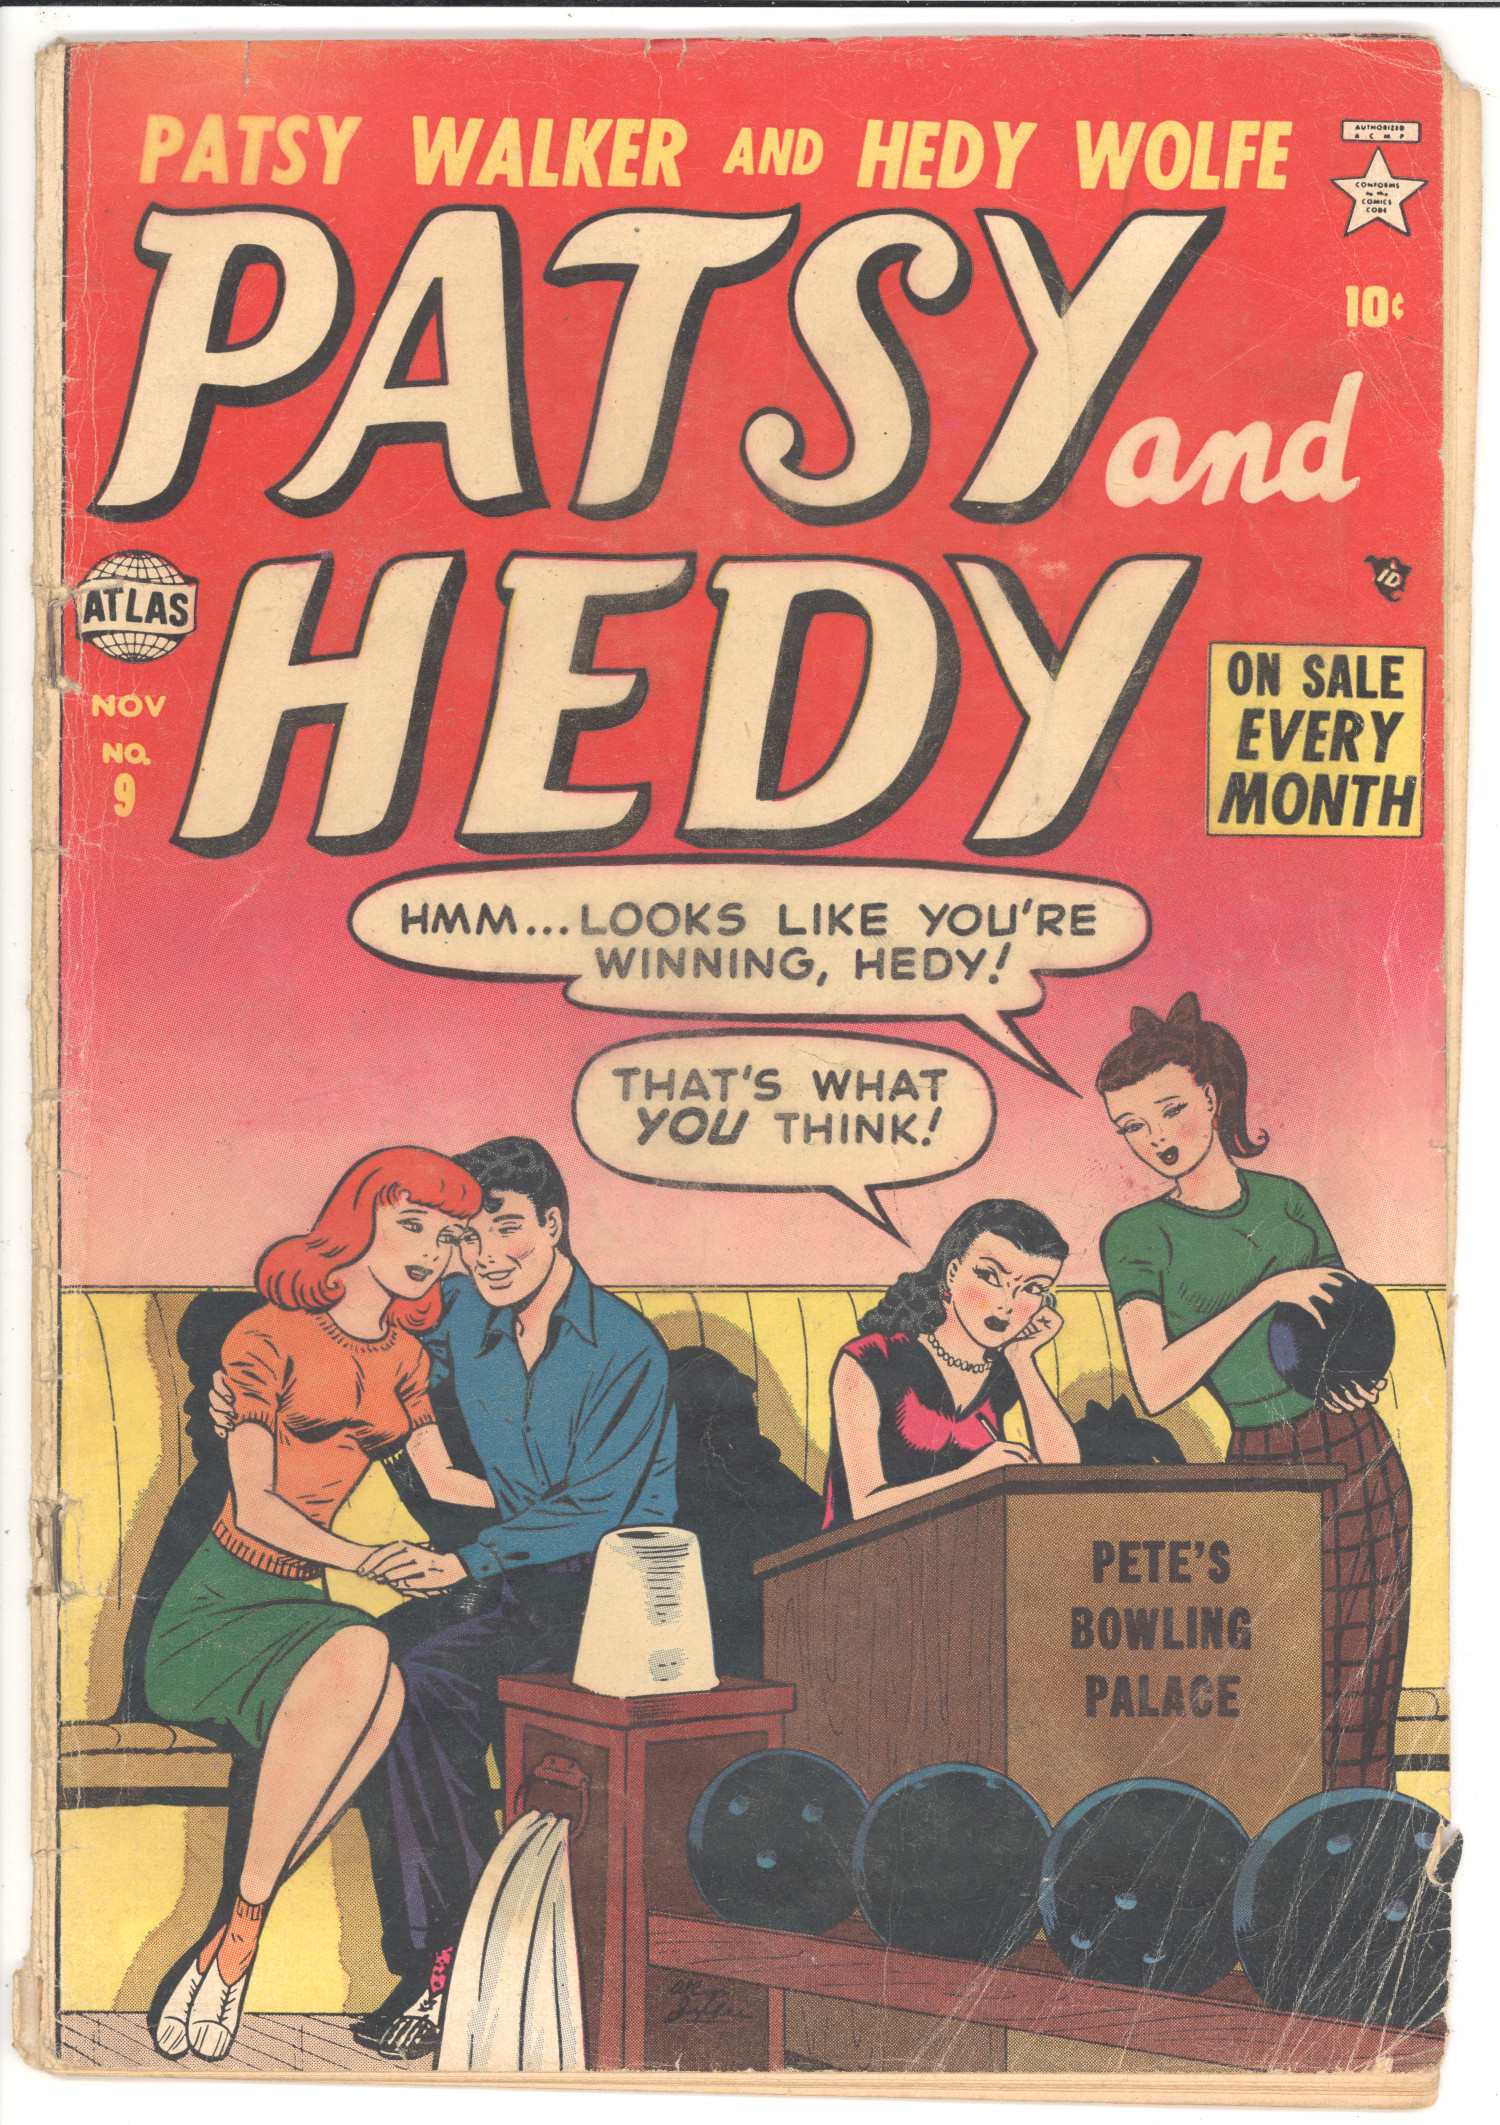 Patsy and Hedy #9 front